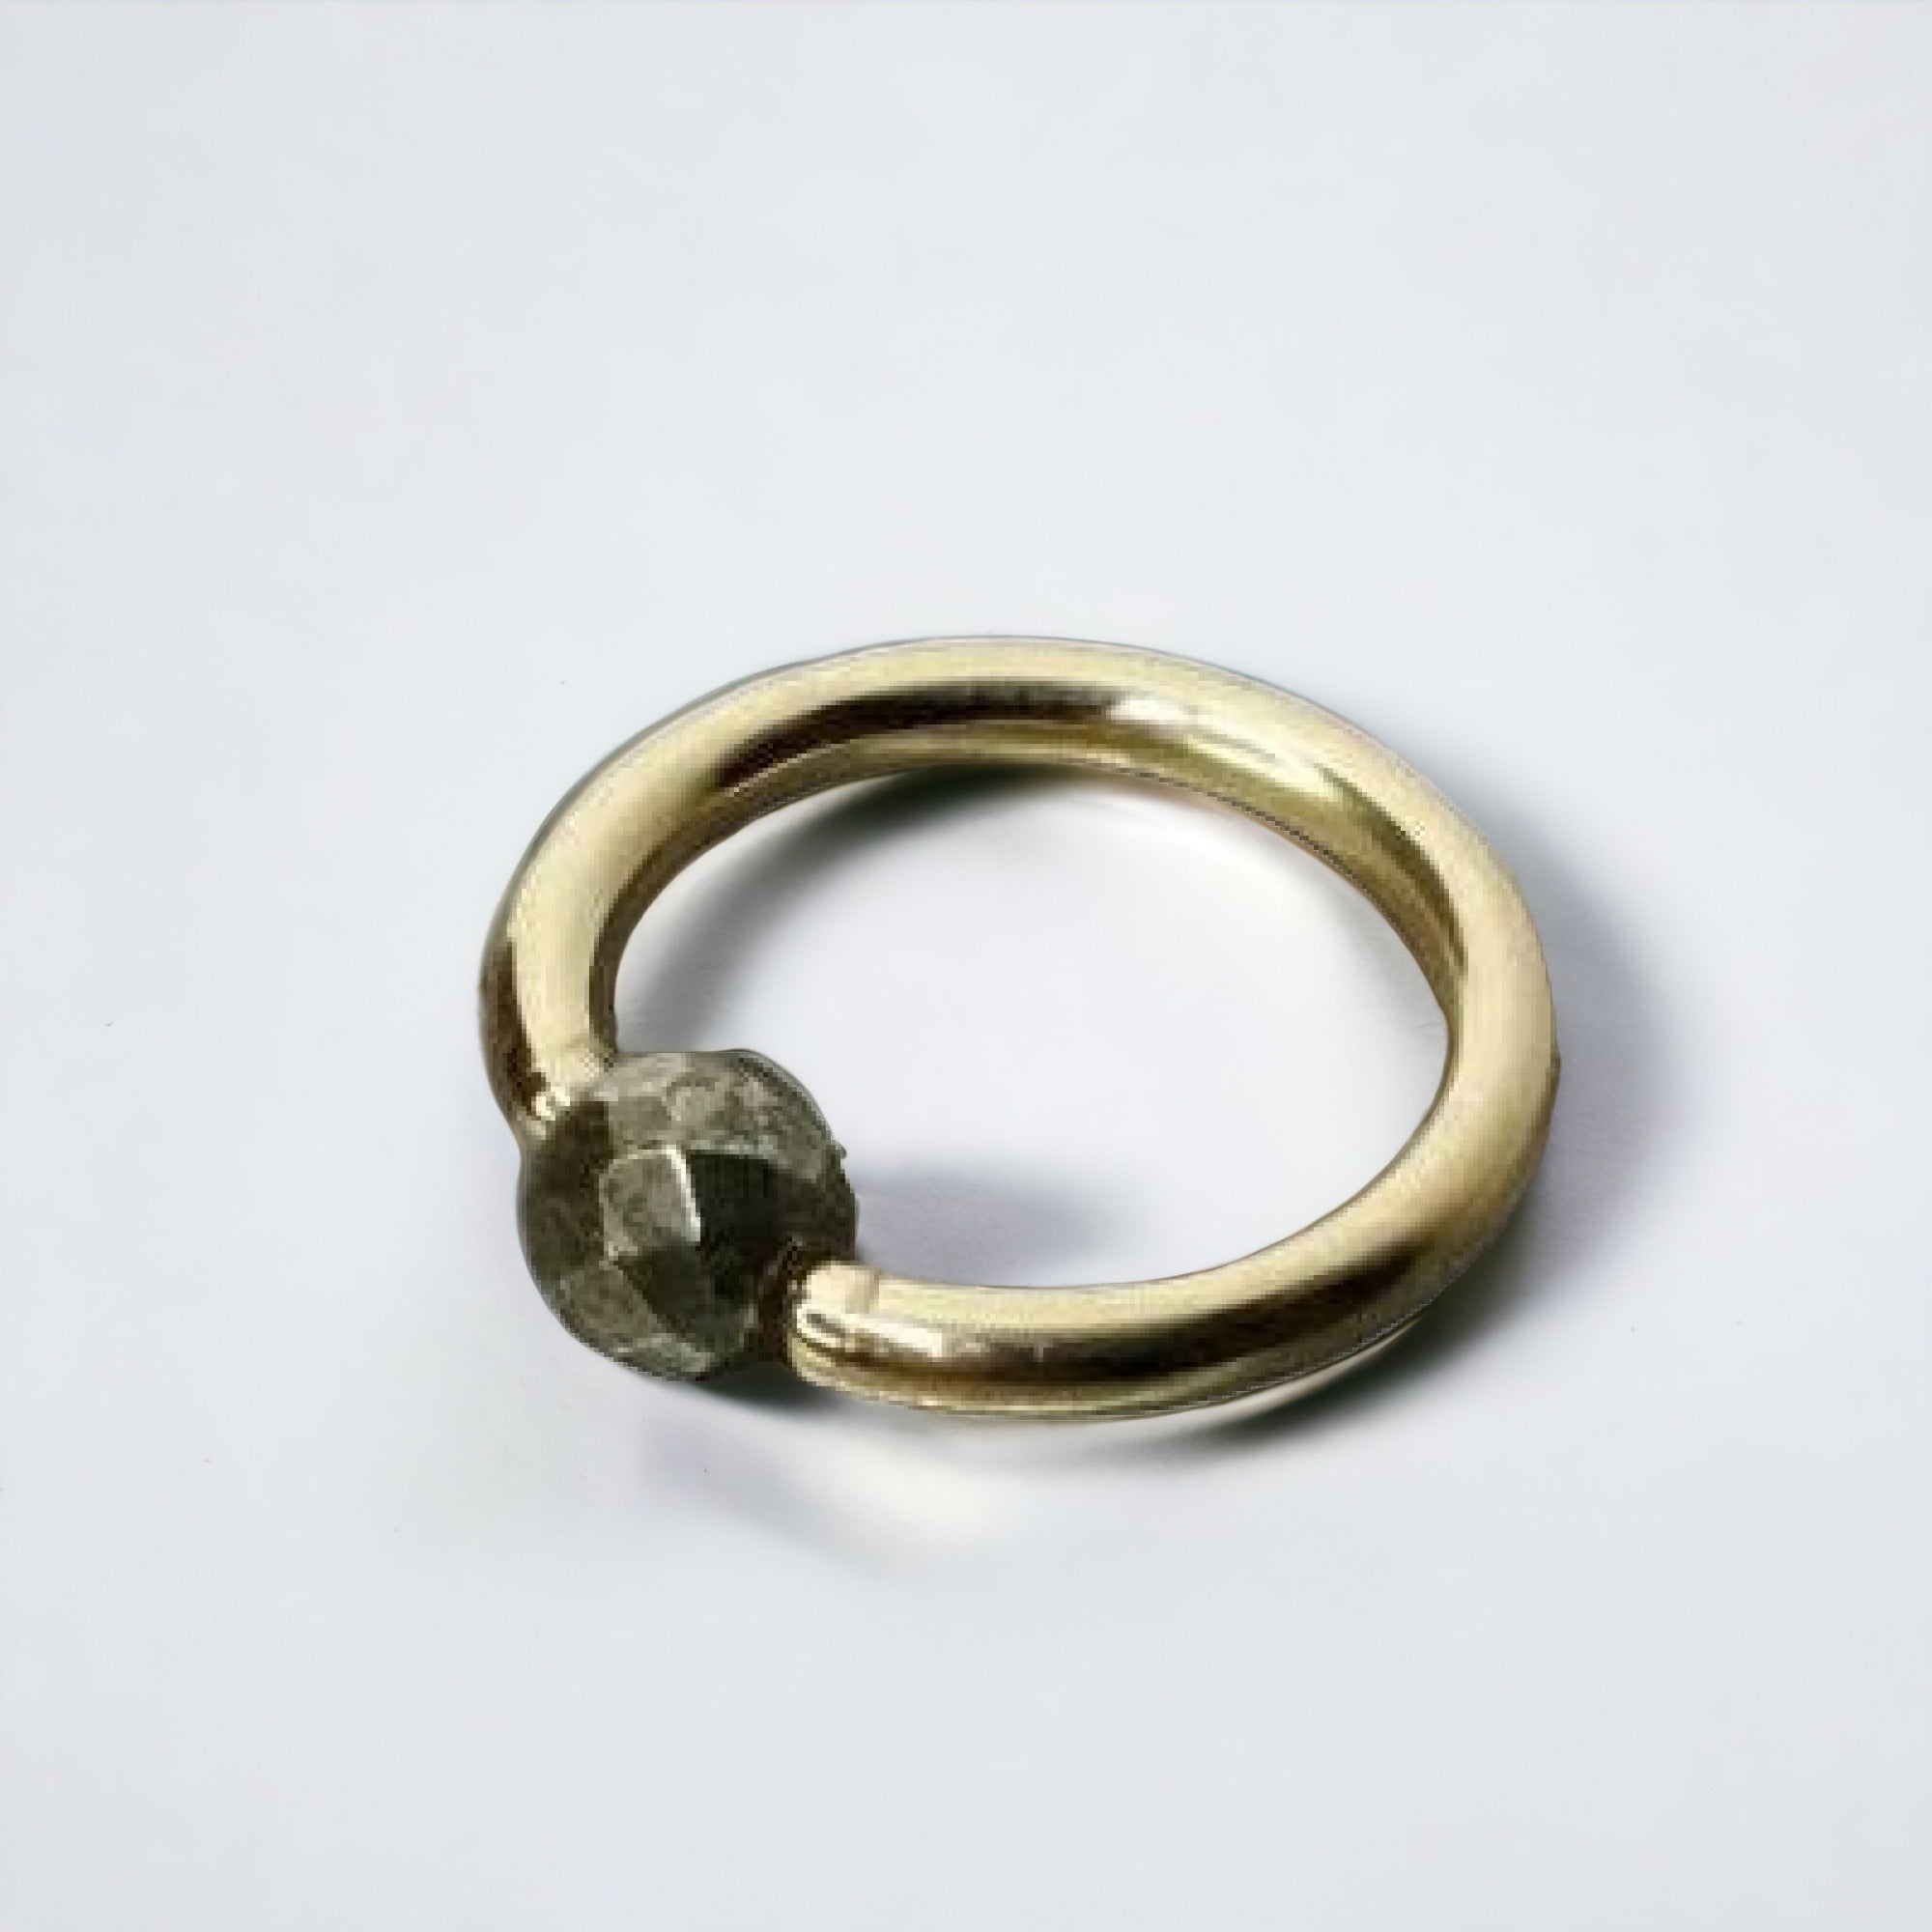 Pyrite Faceted Captive Bead Ring - 14 ga Hoop - 14k Gold (Y, W, or R), Sterling Silver, or Platinum